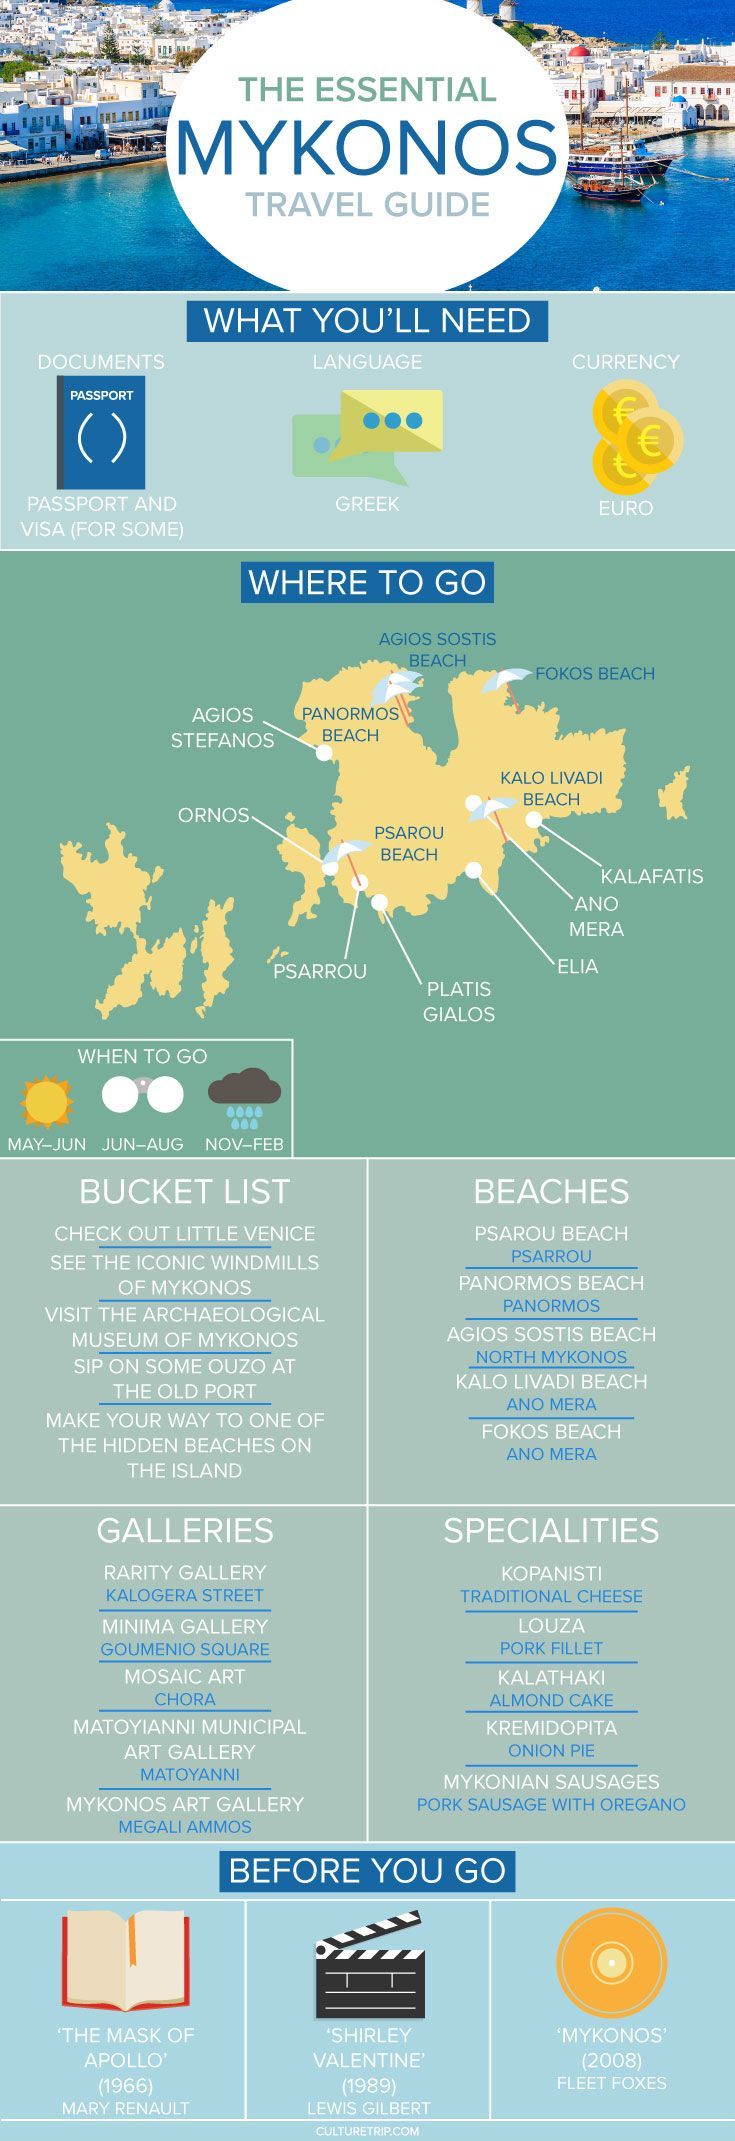 The Essential Travel Guide to Mykonos (Infographic)